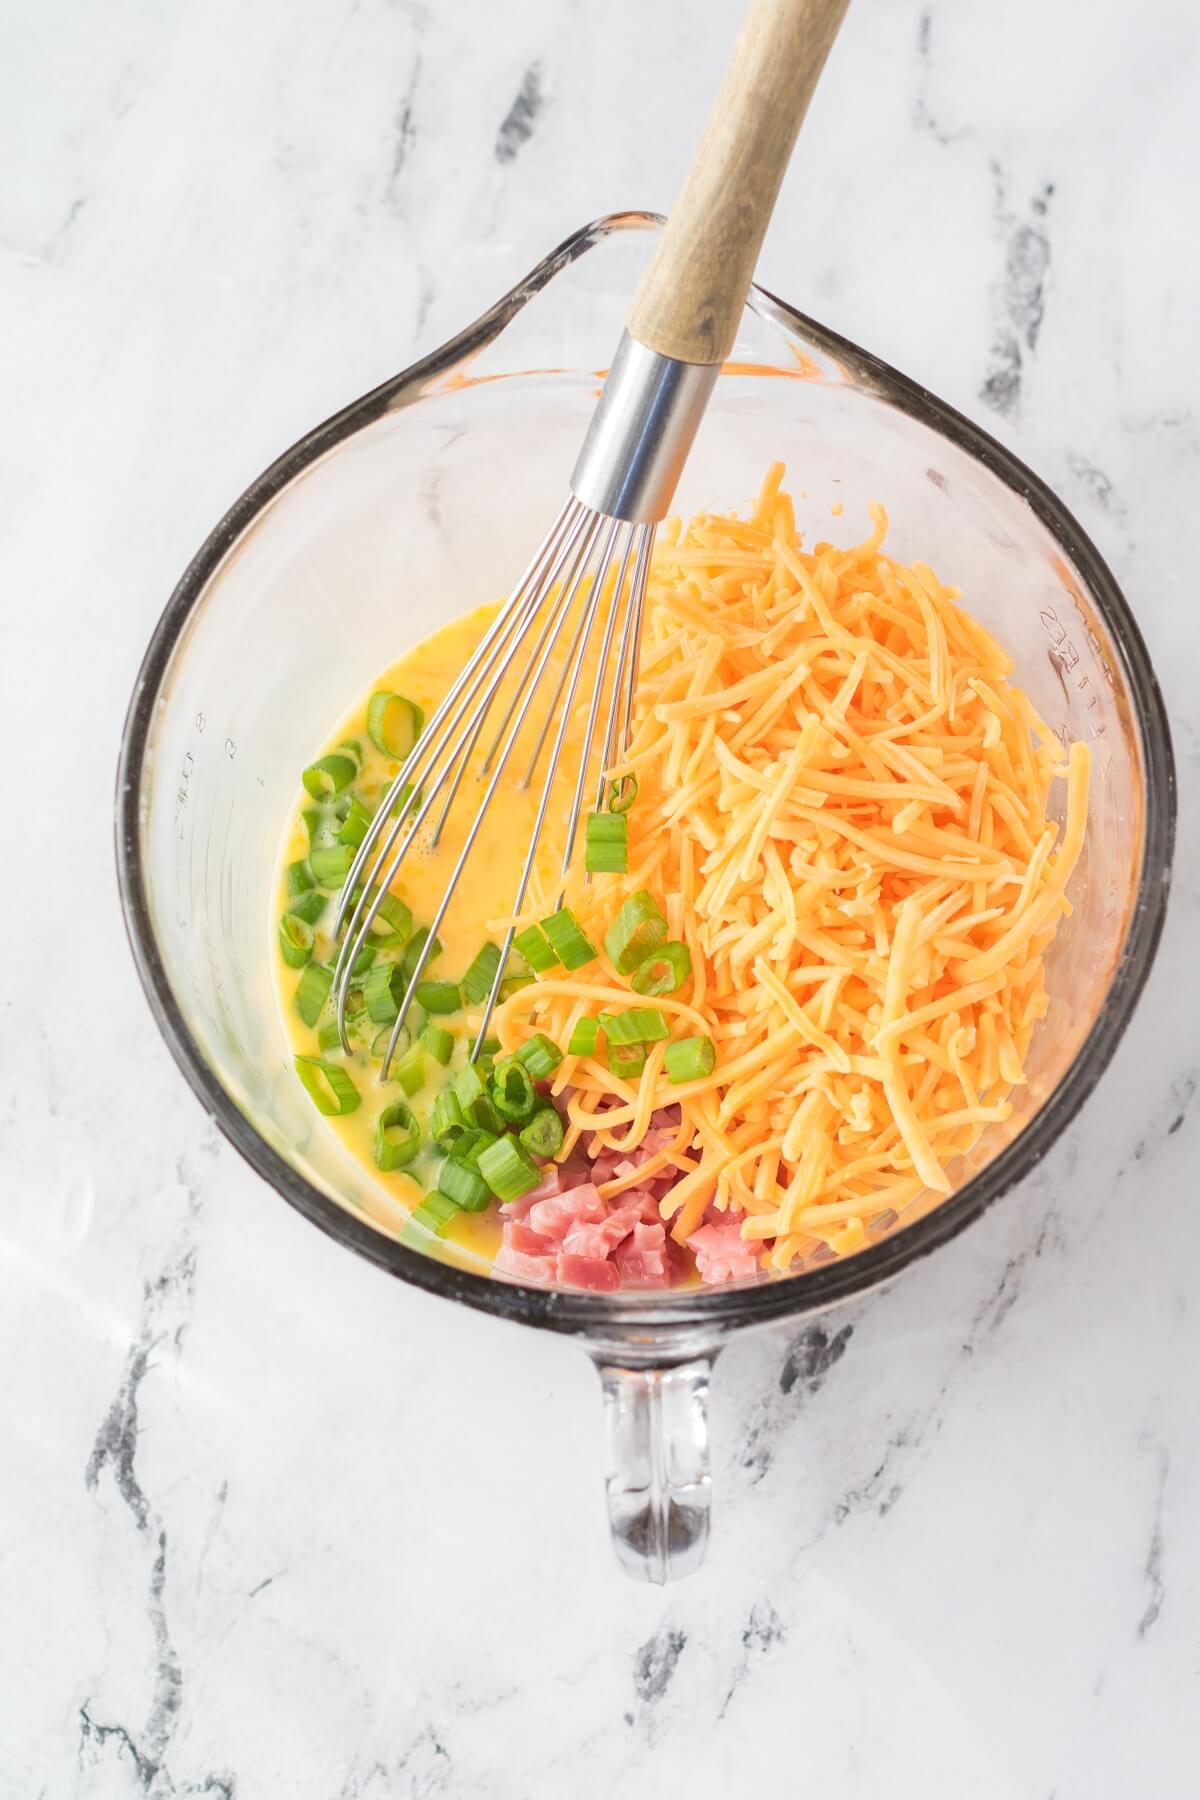 A large glass measuring cup containing whisked eggs, green onions, cheese, and ham.